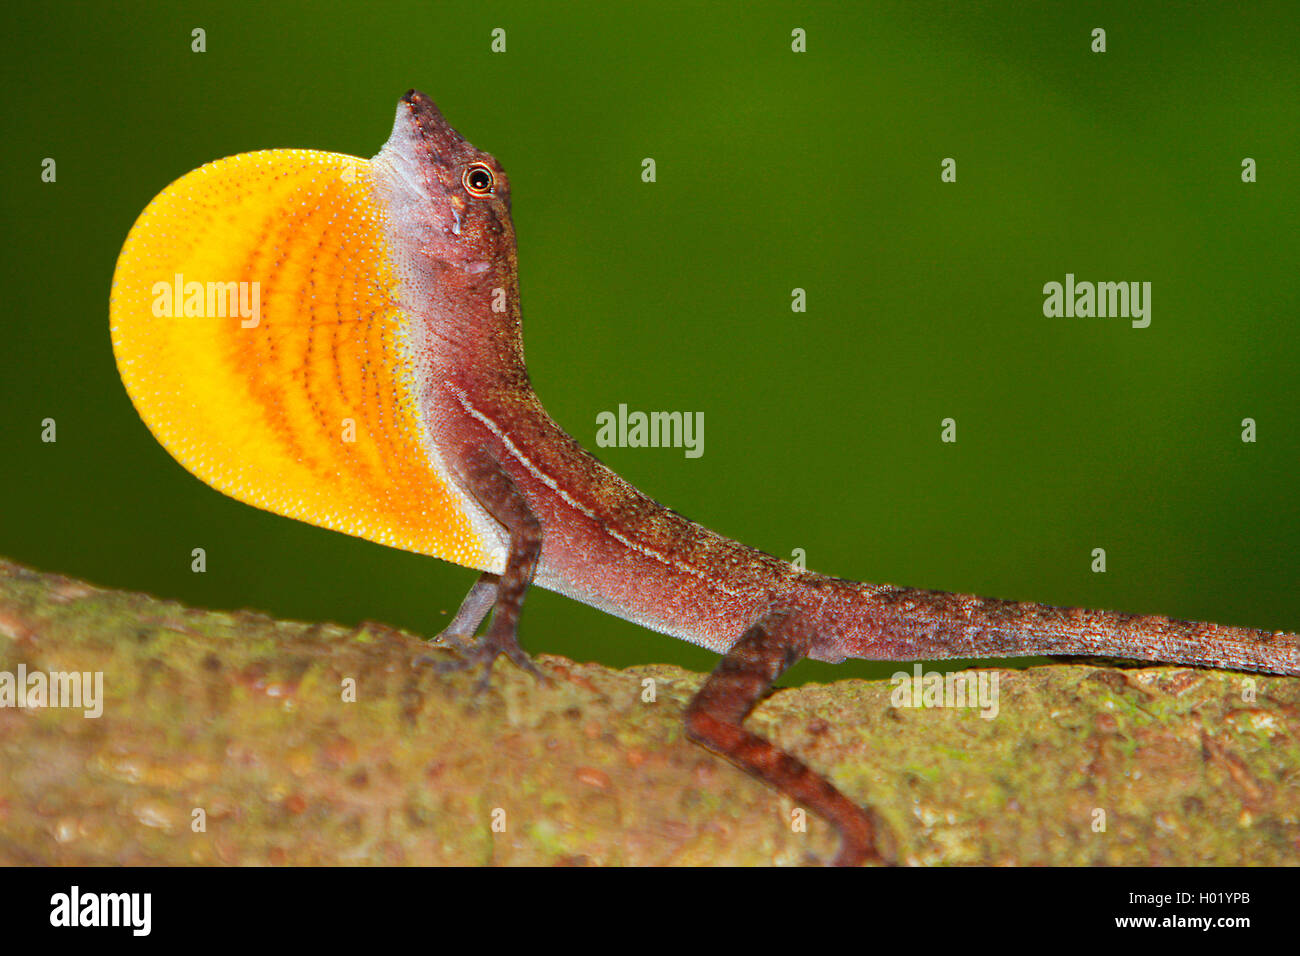 Braune Saumfingerechse, Braune Saumfinger-Echse (Norops polylepis), Maennchen, Costa Rica | Brown Anole, Golfo Dulce Anole (Noro Stock Photo